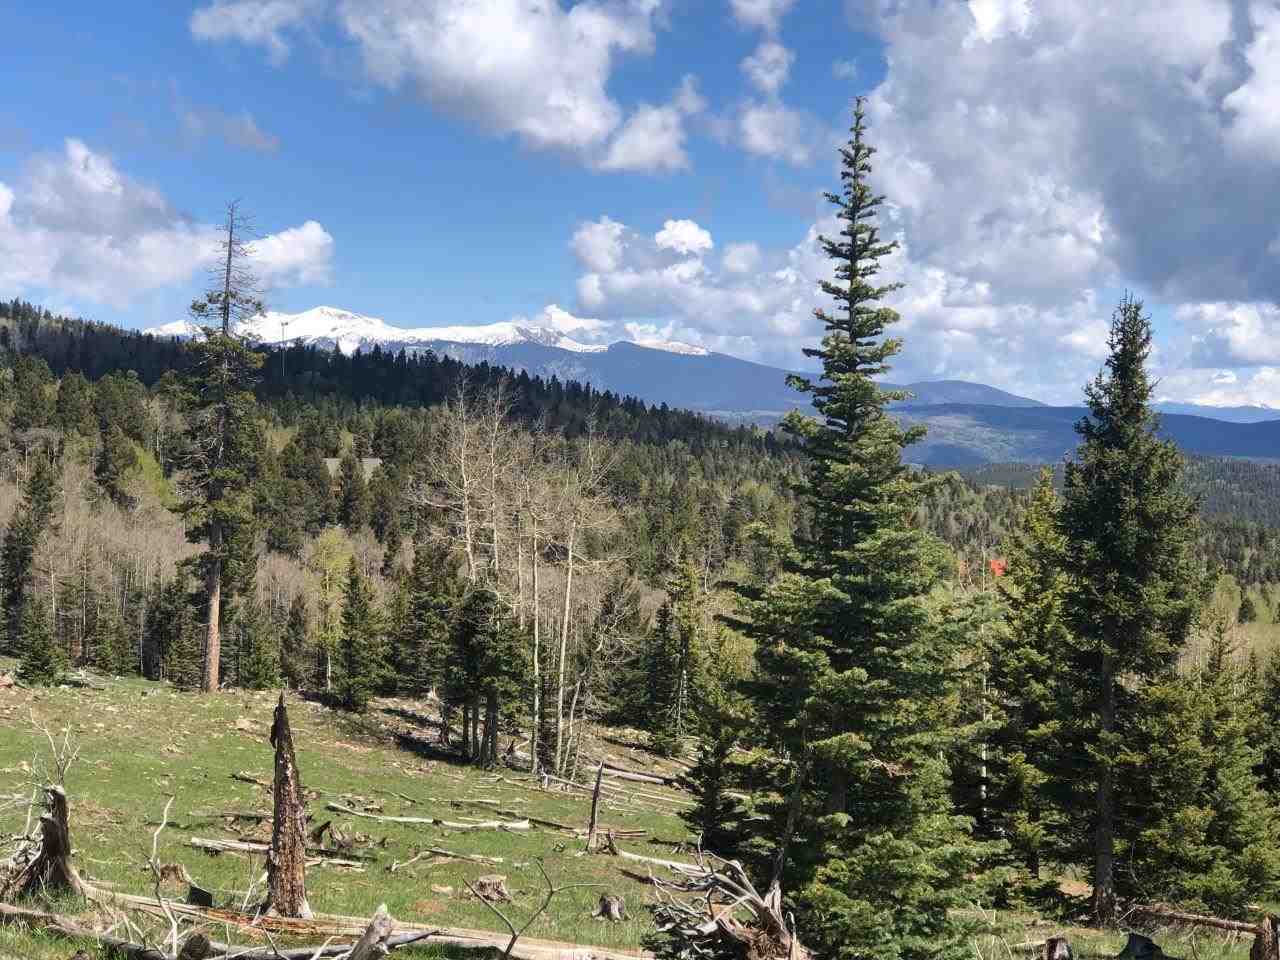 See it all from the top! Fantastic Views of Wheeler Peak, Eagle Nest Lake and the Moreno Valley. Plus it backs up to national forest.